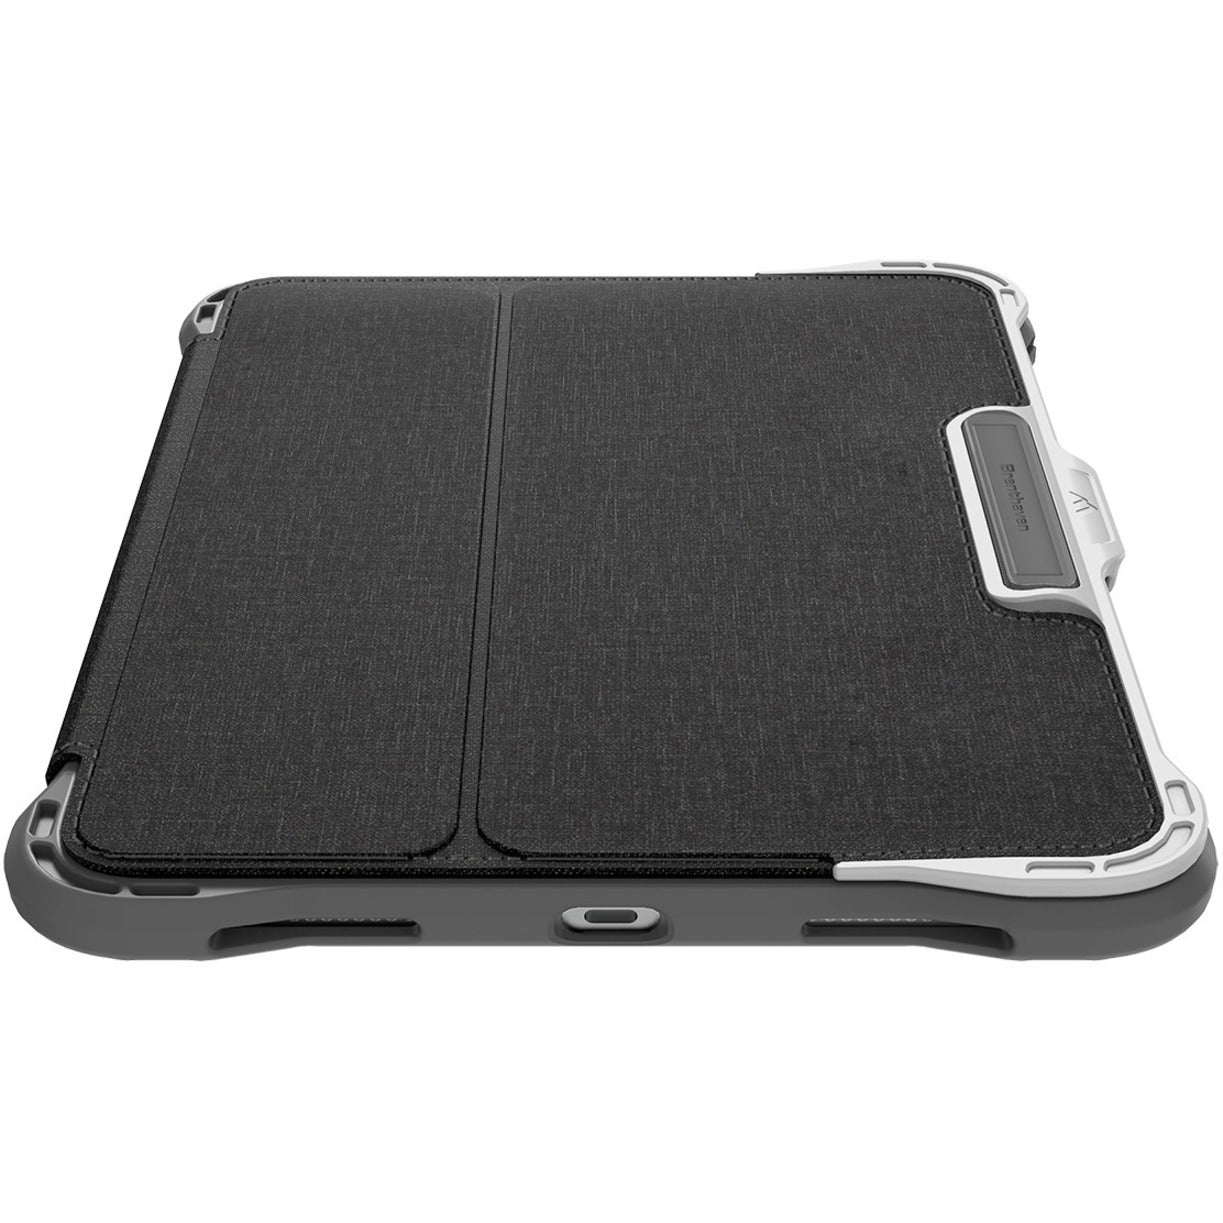 Brenthaven EDGE FOLIO FOR IPAD 10TH GEN. DROP TESTED TO PROTECT AGAINST FALLS FROM UP TO SIX FEET, EXCEEDING MILITARY STANDARD MIL-STD-810G. CRUMPLE ZONE CORNERS ABSORB AND DEFLECT IMPACT. (2281)